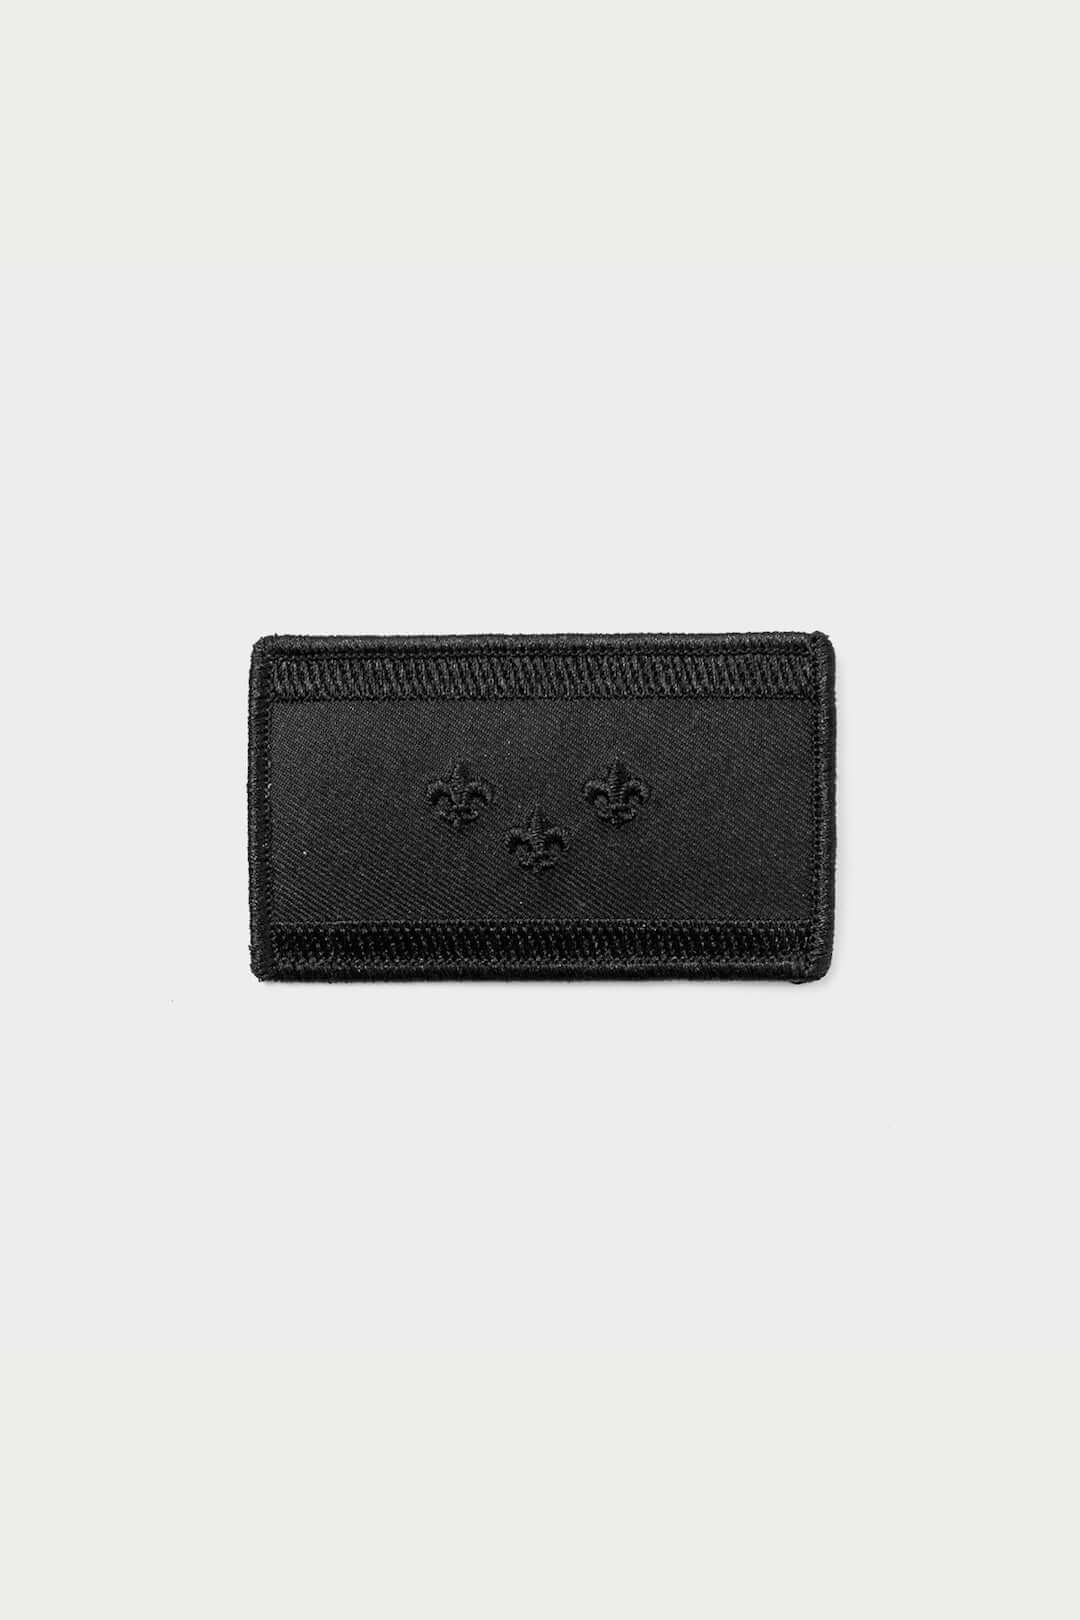 Black Flag Patch - Accessories - DNO